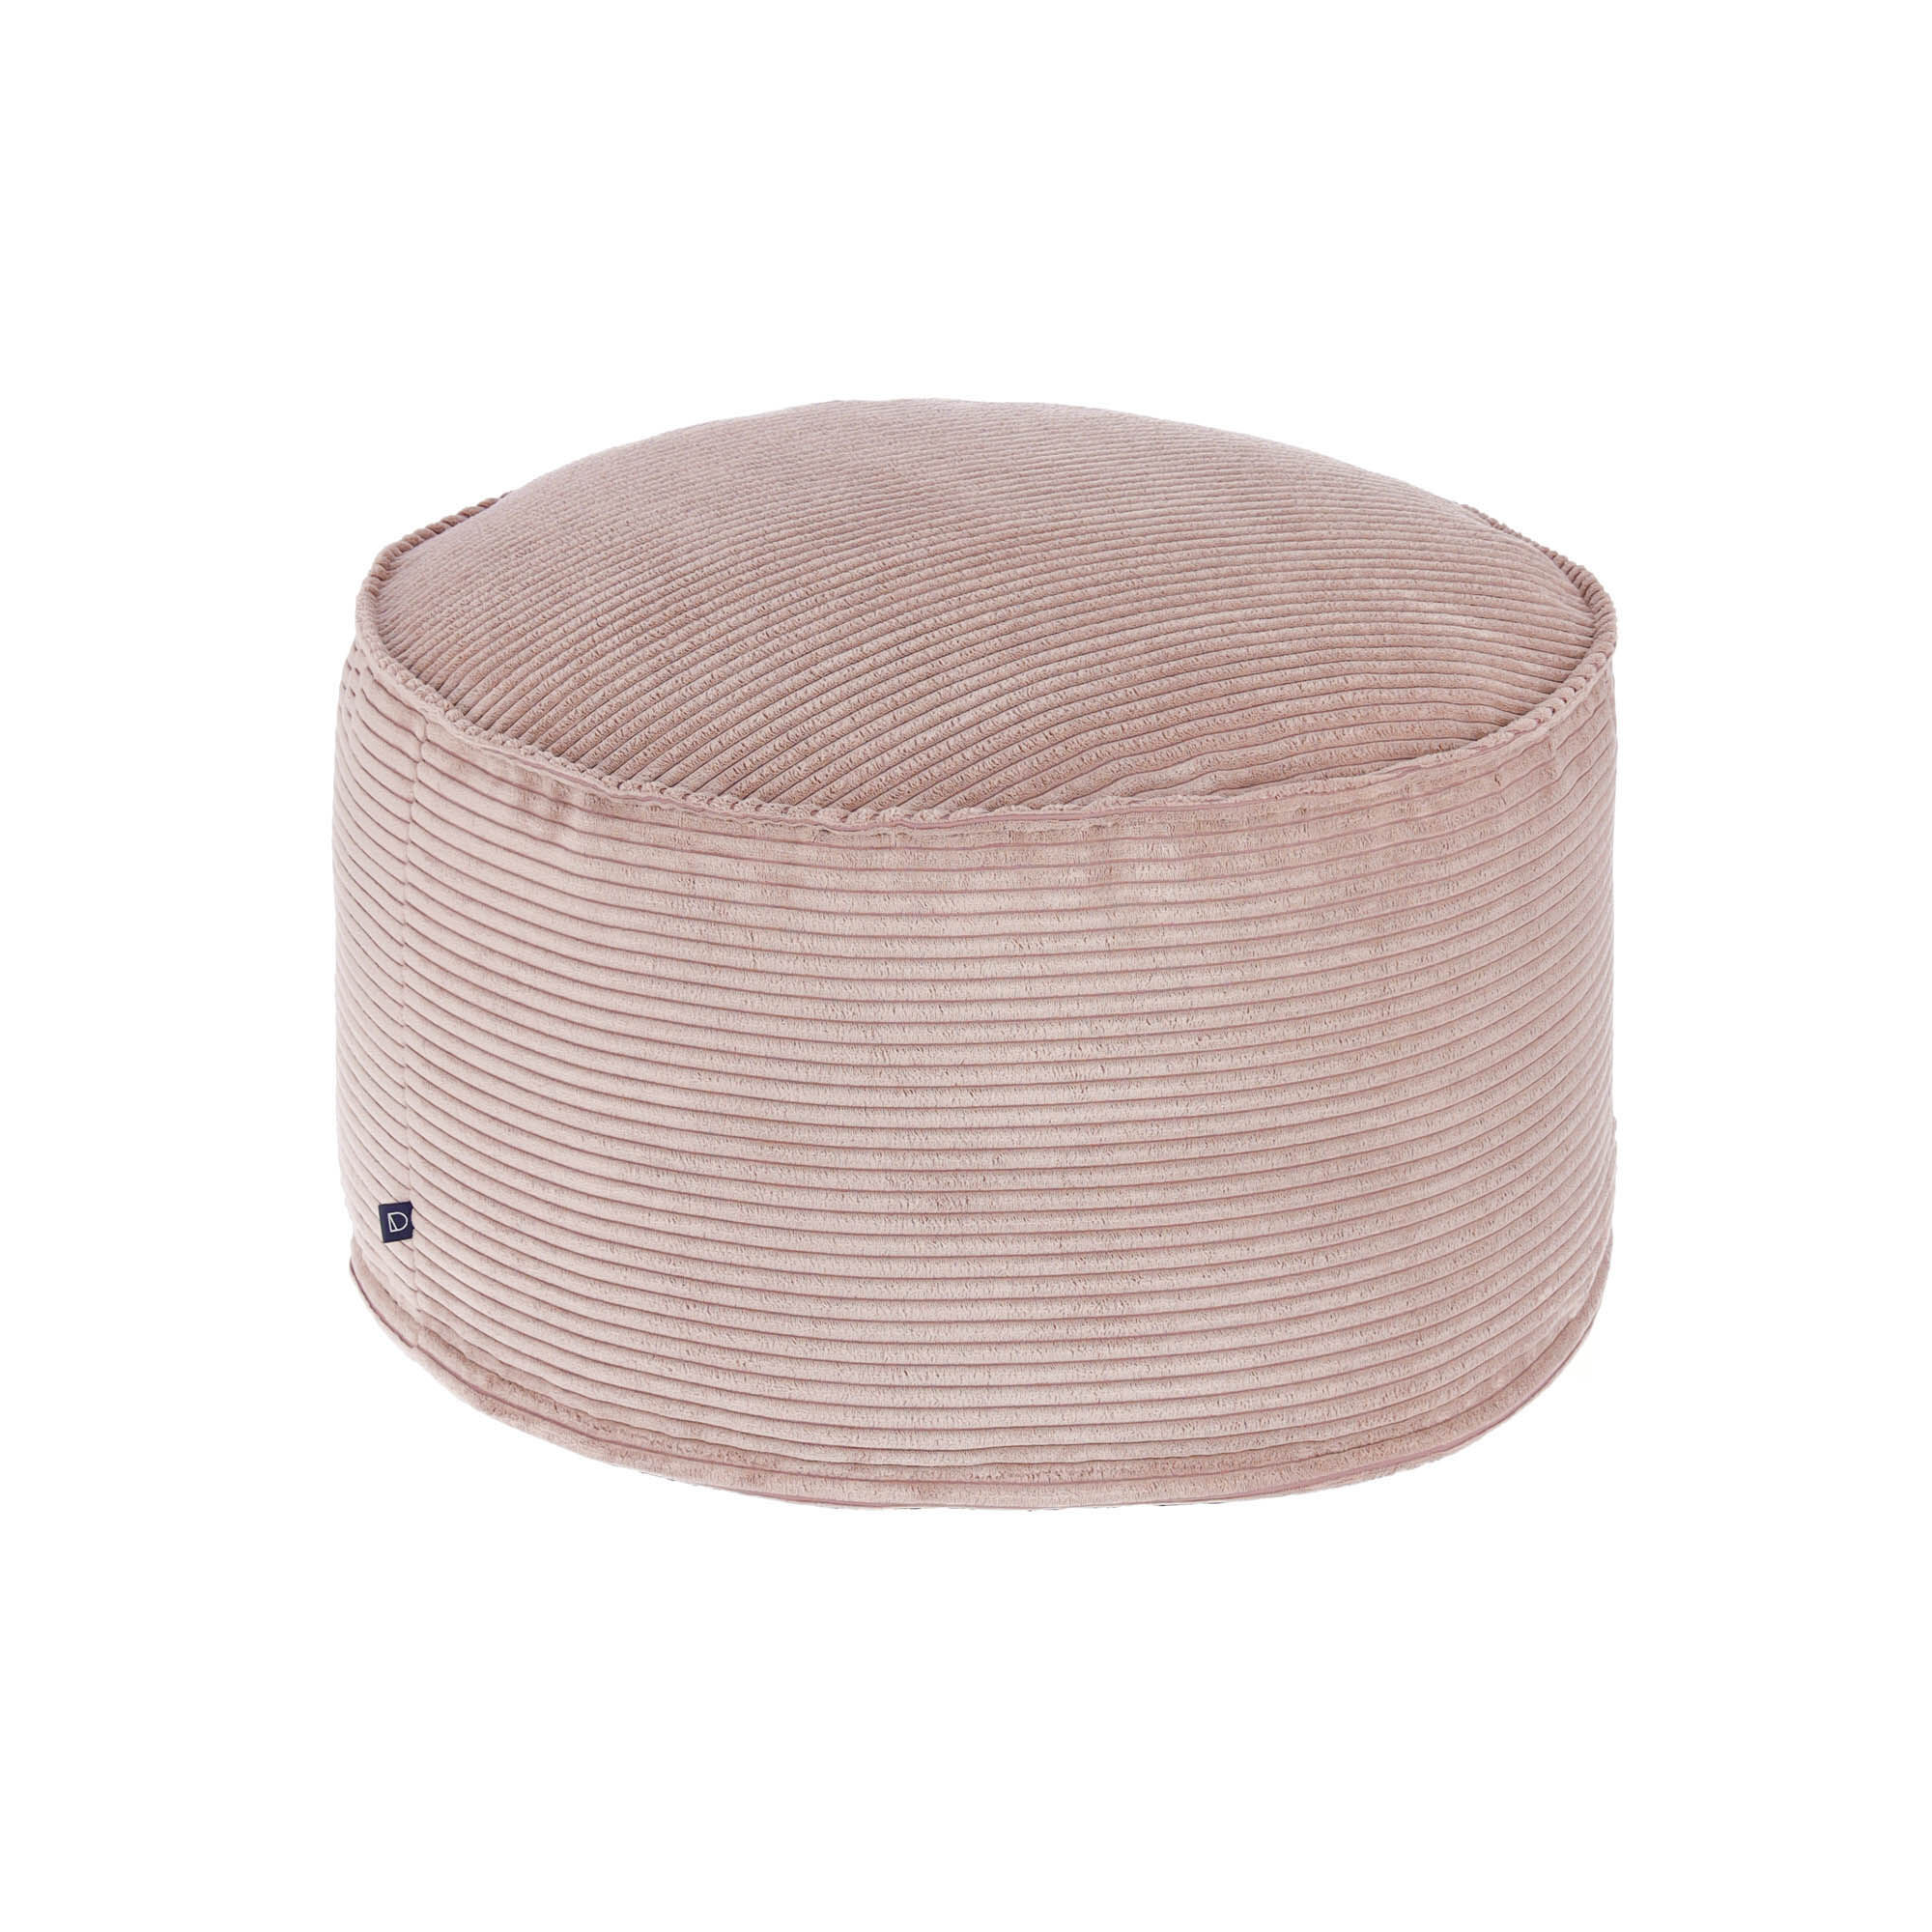 Kave Home Large pink corduroy Wilma pouf Ø 70 cm